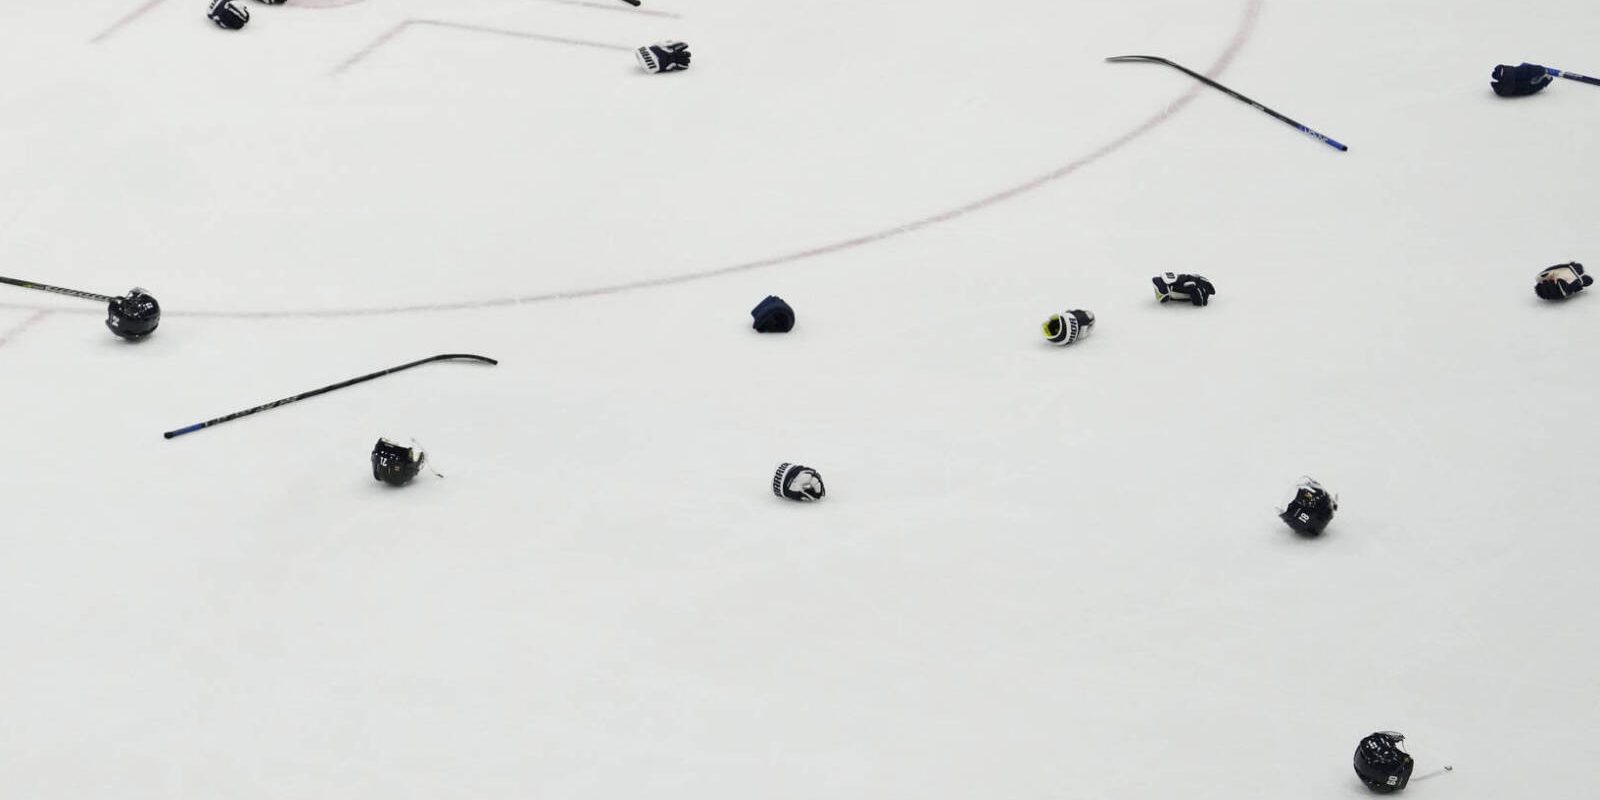 Feb 20, 2022; Beijing, China; A view of sticks, gloves, and helmets of Team Finland players during their celebration after the game against Team ROC during the Beijing 2022 Olympic Winter Games at National Indoor Stadium. Mandatory Credit: George Walker IV-USA TODAY Sports